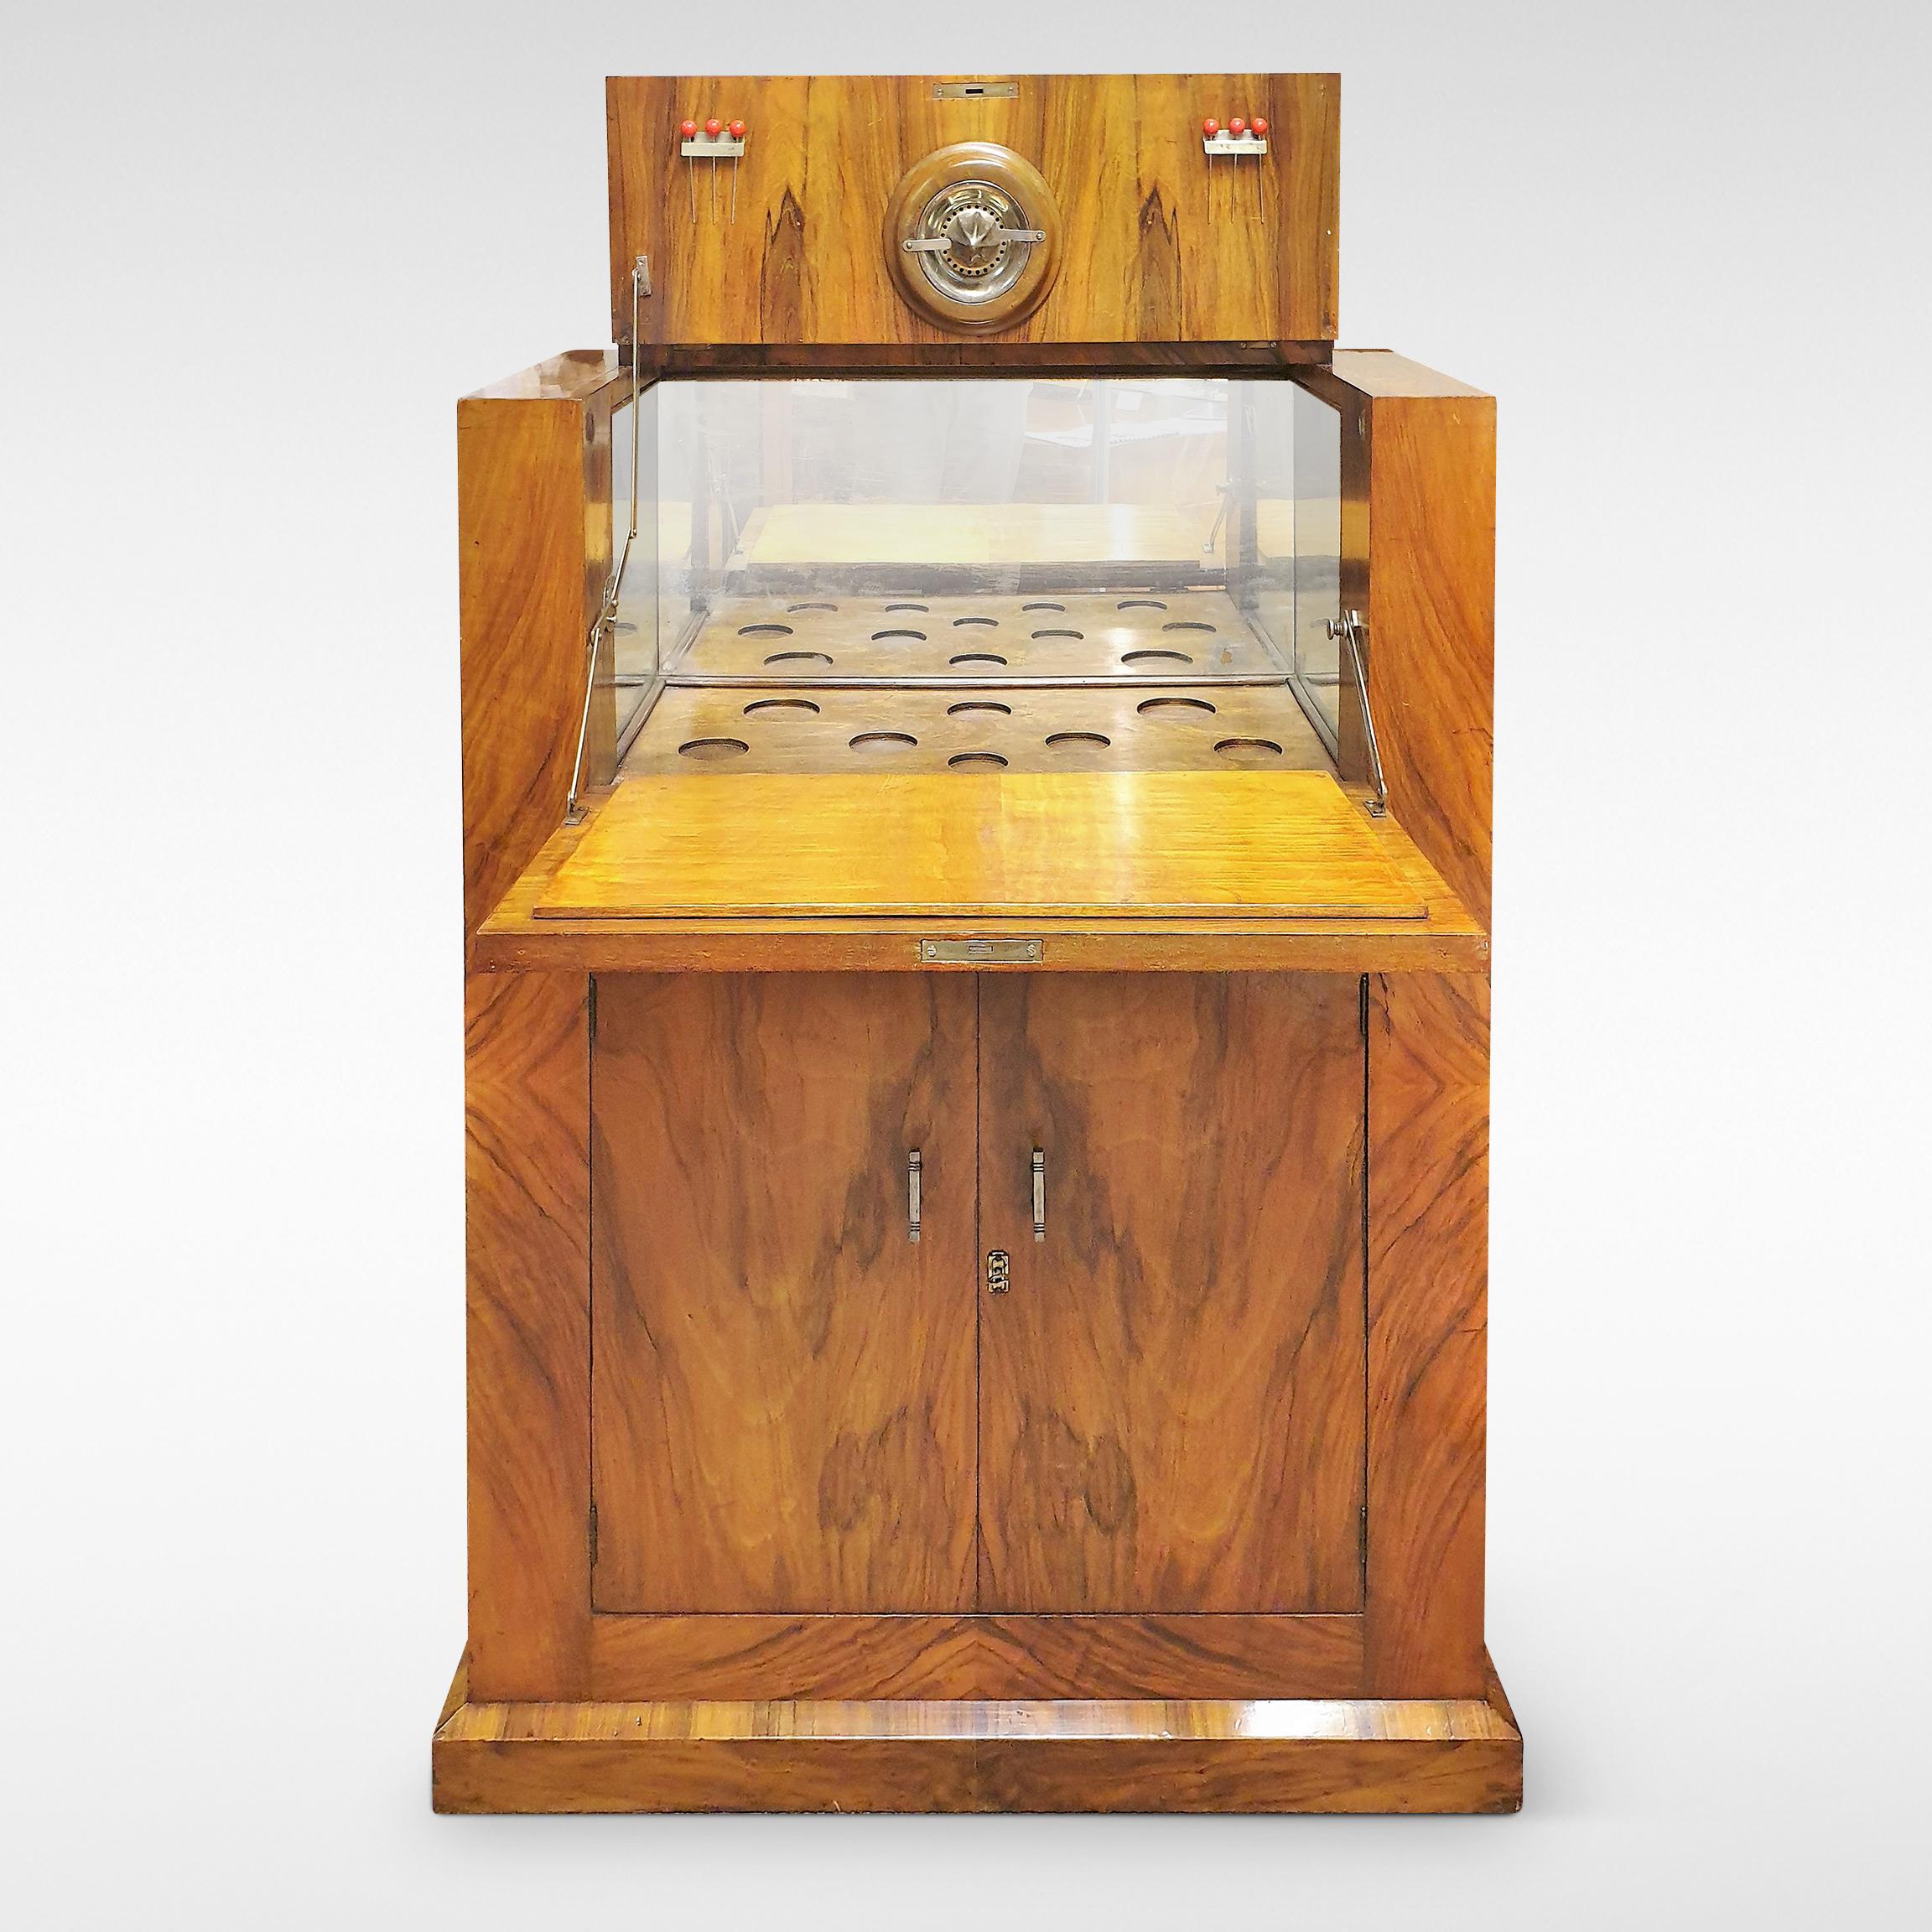 A compact Modernist style cocktail cabinet from the Art Deco period in figured walnut veneers with a fitted interior, circa 1935.